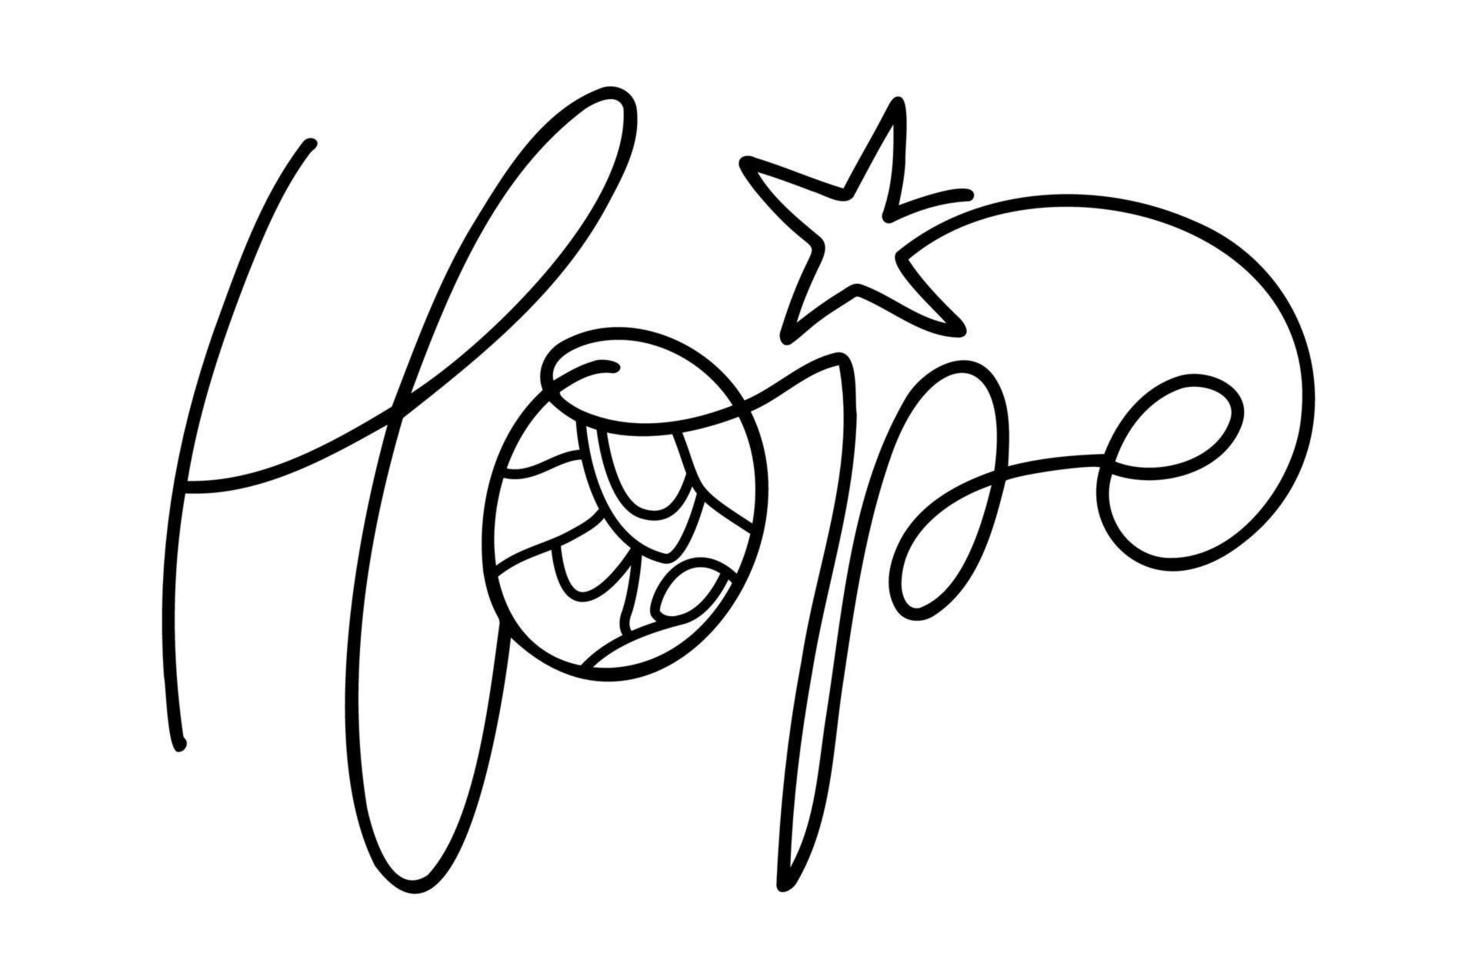 Hope monoline calligraphy text and Christmas Vector religious Nativity Scene of baby Jesus with Mary Joseph and star. Minimalist art line drawing, print for clothes and logo design